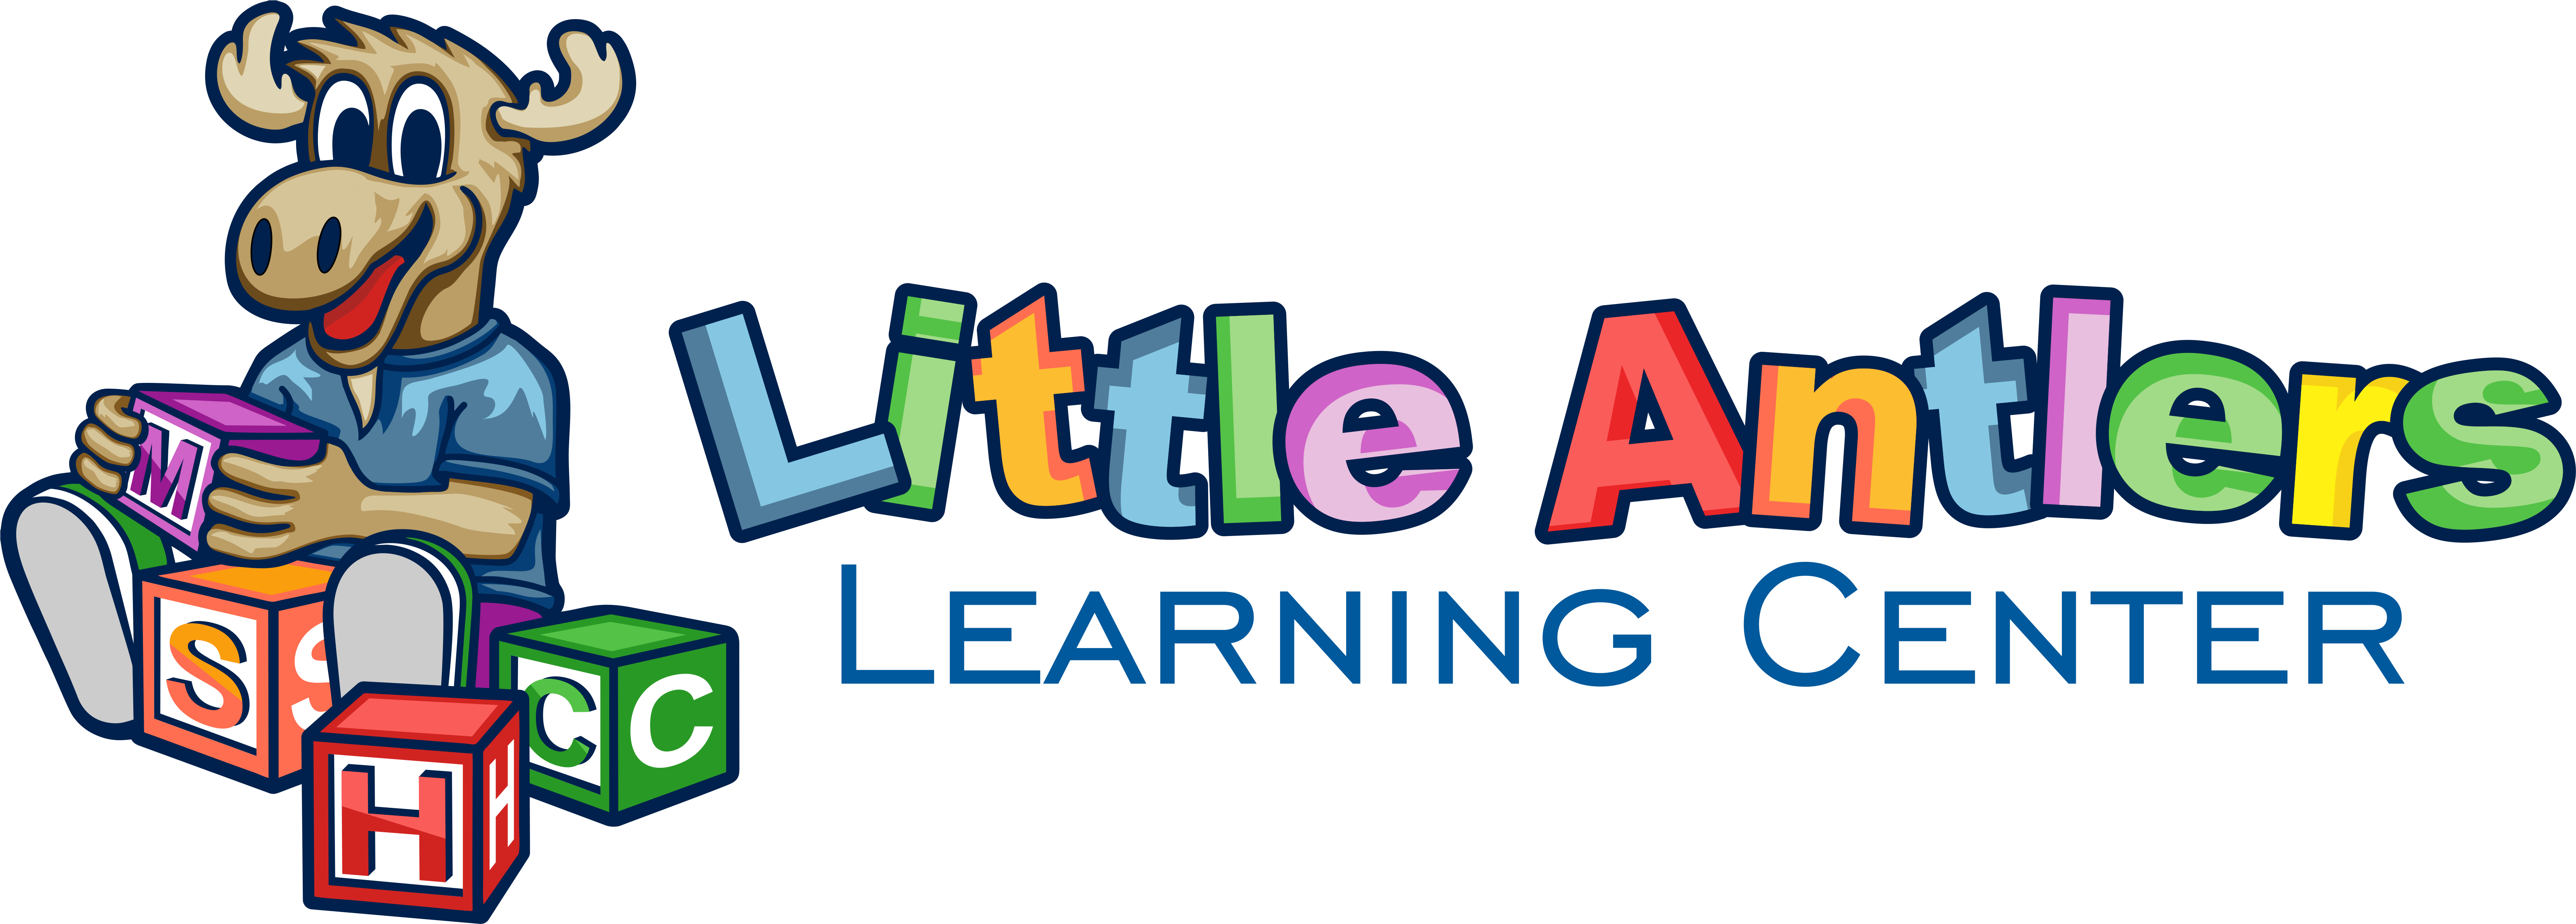 Little Antlers Learning Center Logo Featuring Max the Moose